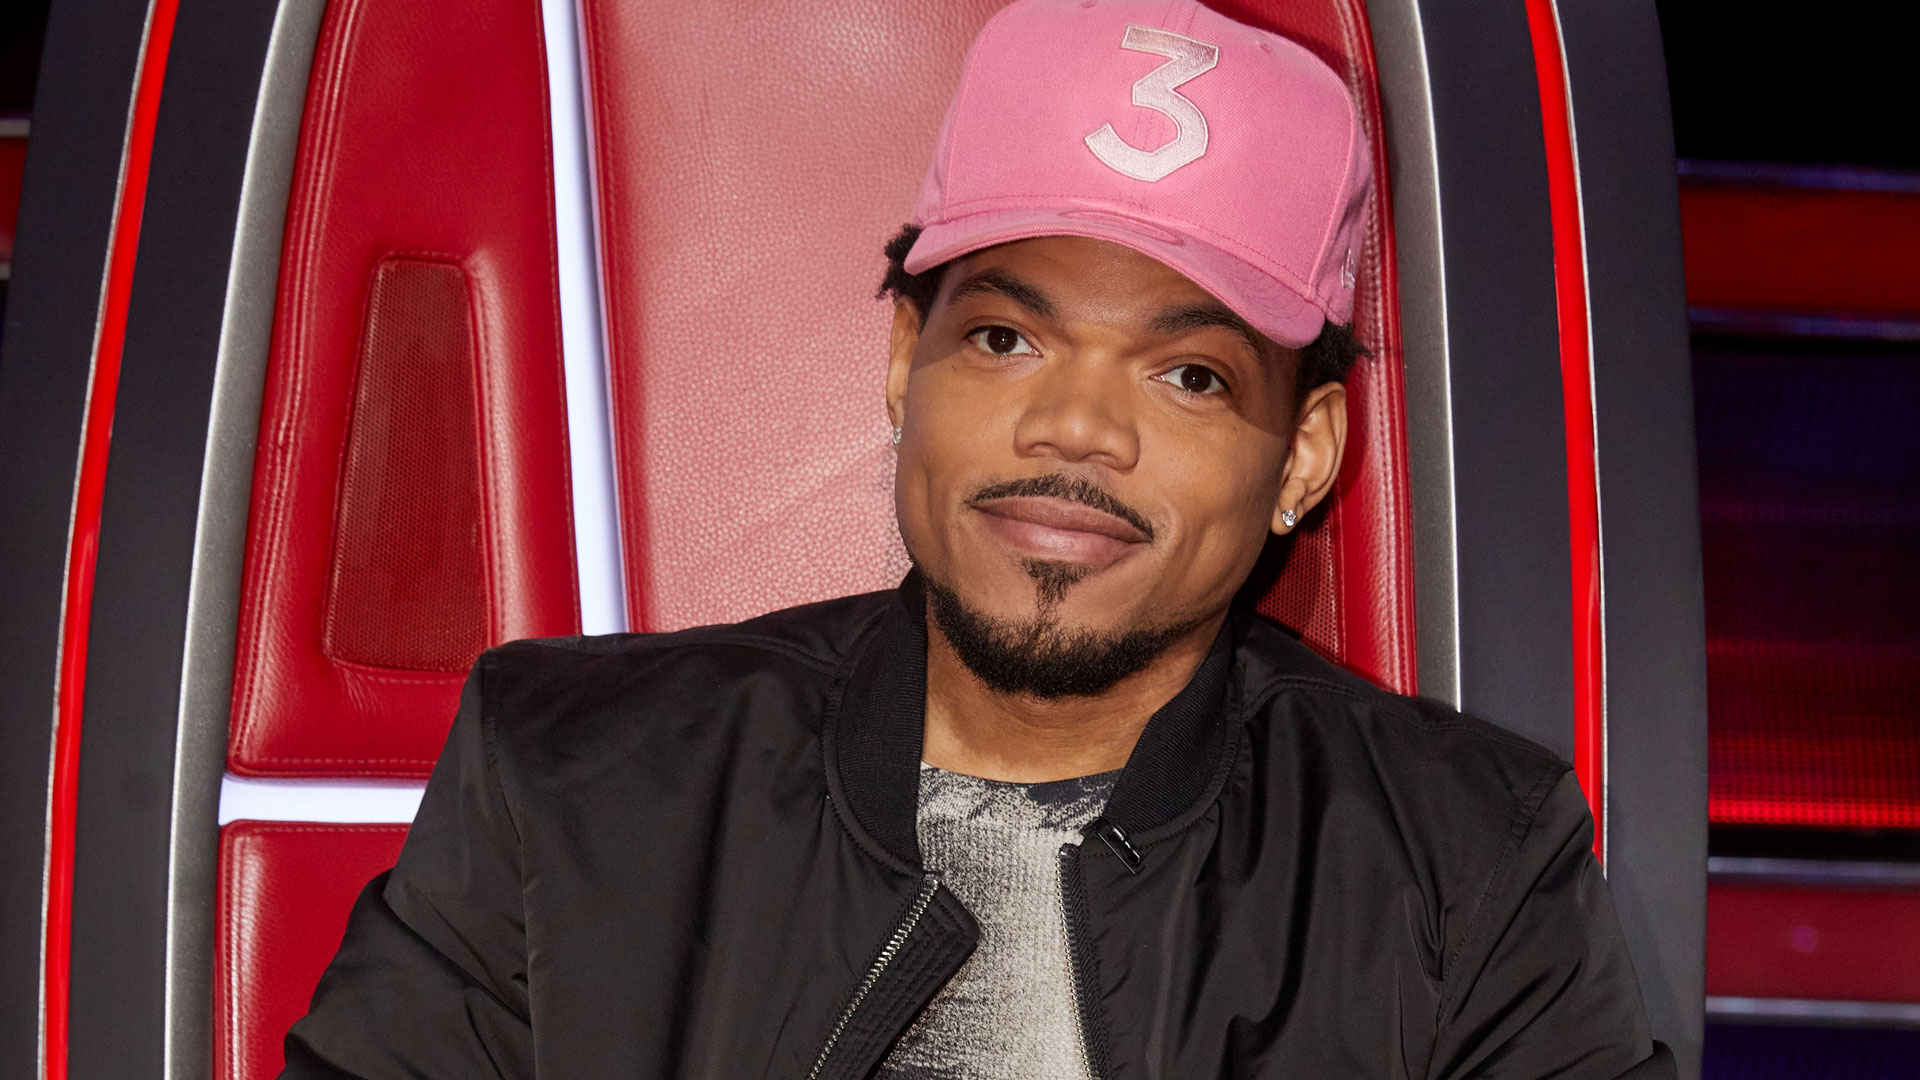 Chance the Rapper’s Battles Experience Includes One Moment That Had Him "Shaking" | The Voice | NBC